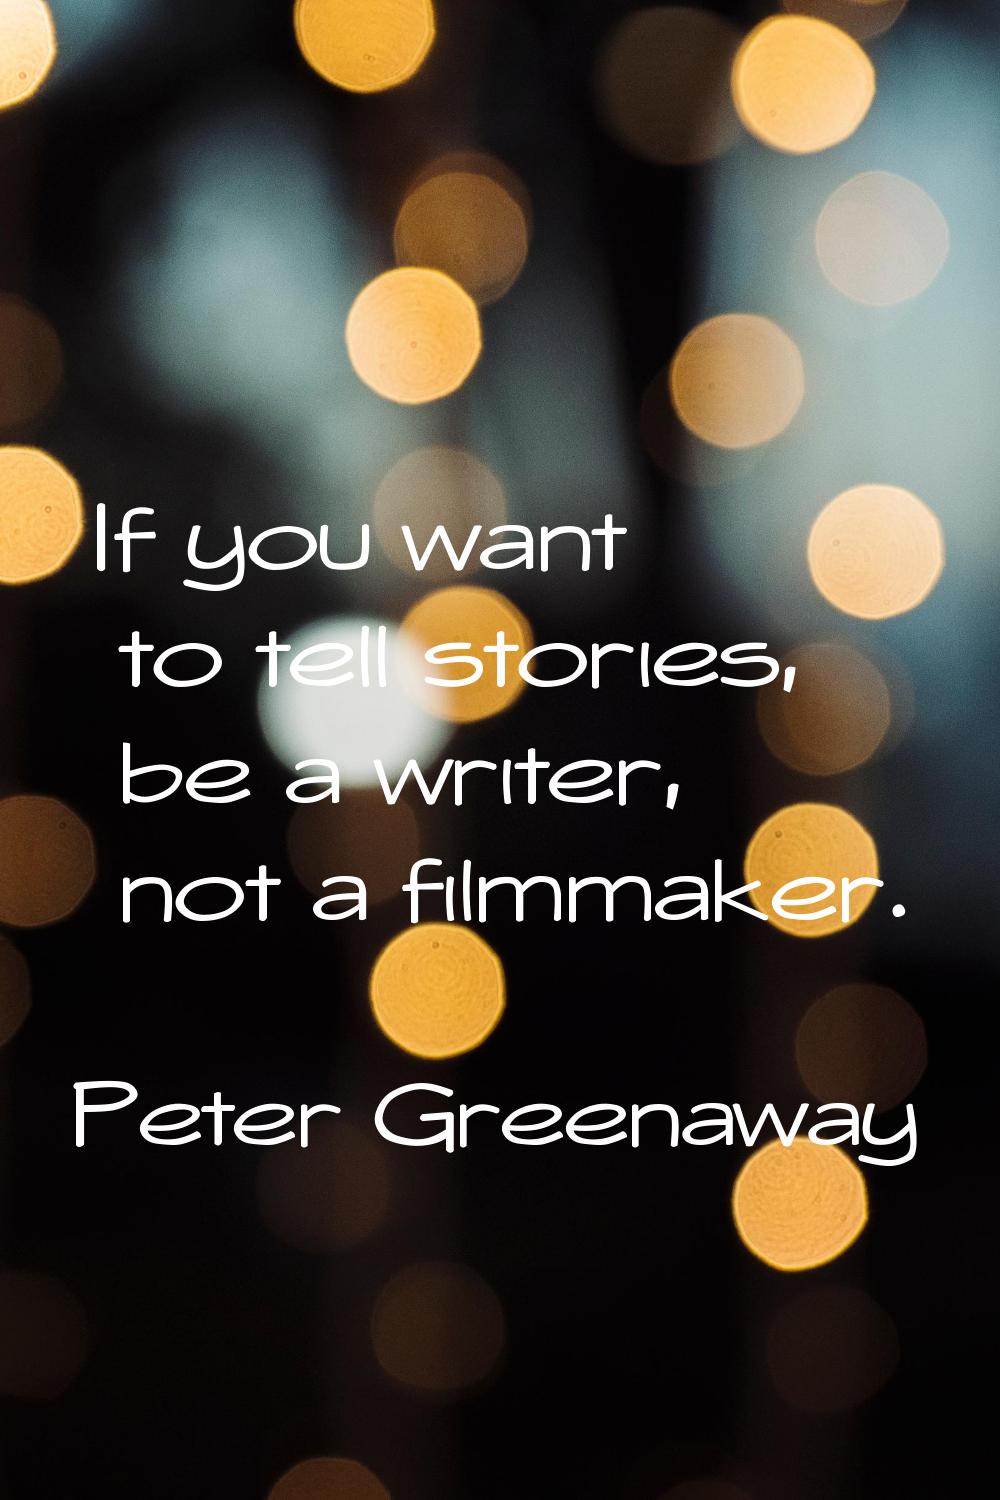 If you want to tell stories, be a writer, not a filmmaker.